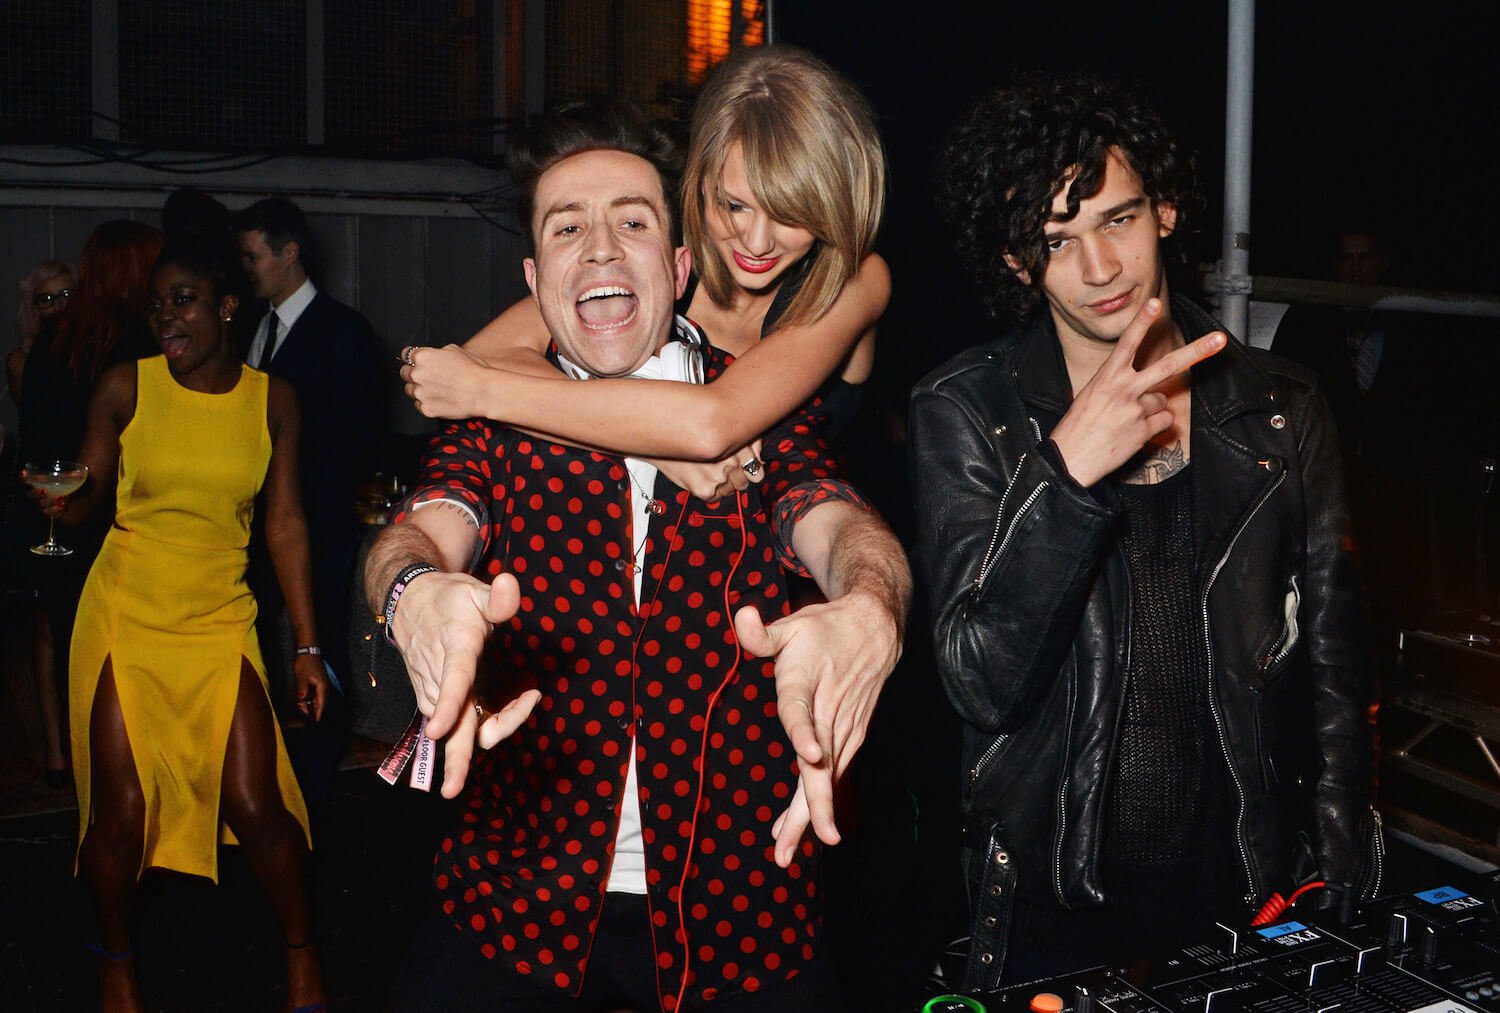 Taylor Swift with her arms around Nick Grimshaw while standing next to Matty Healy